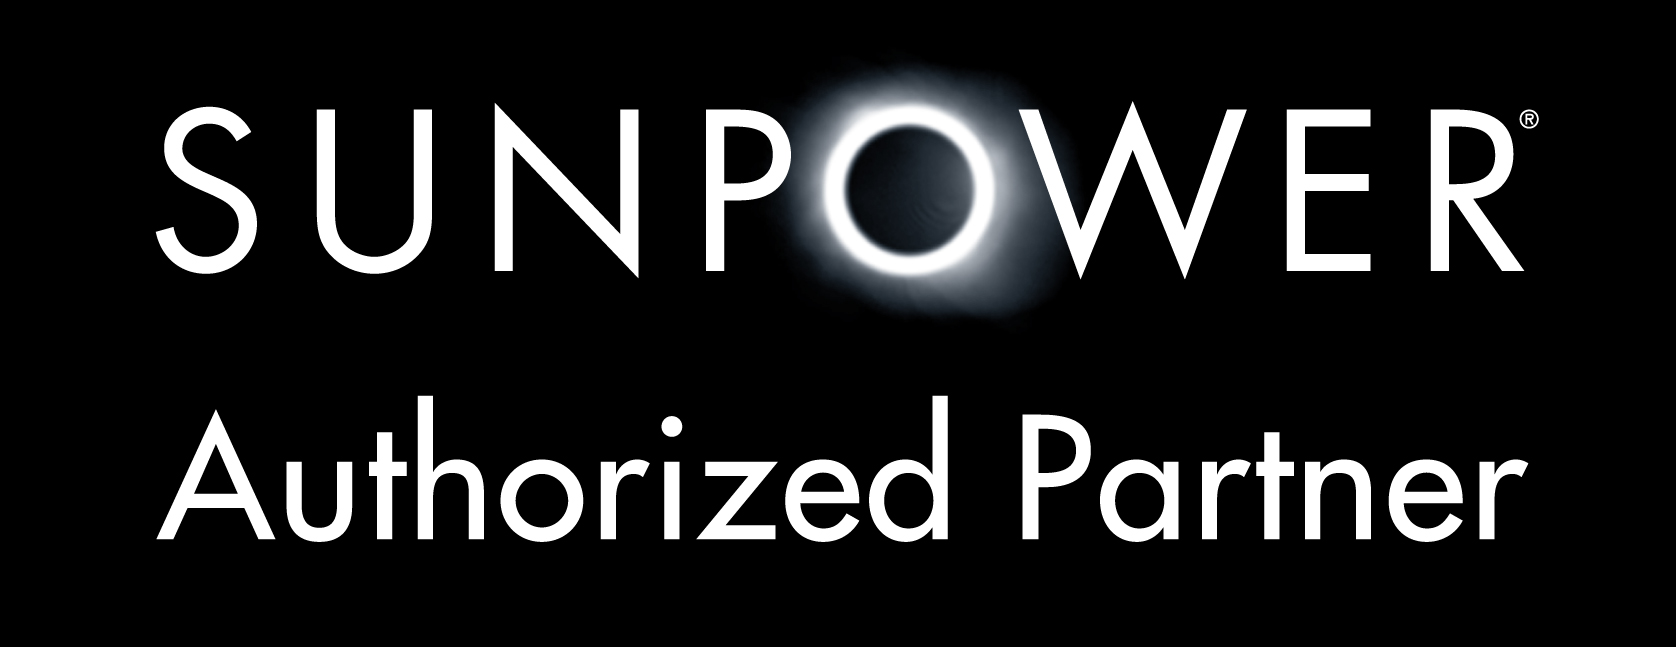 http://www.sunpowercorp.it/homes/how-to-buy/solar-installers/